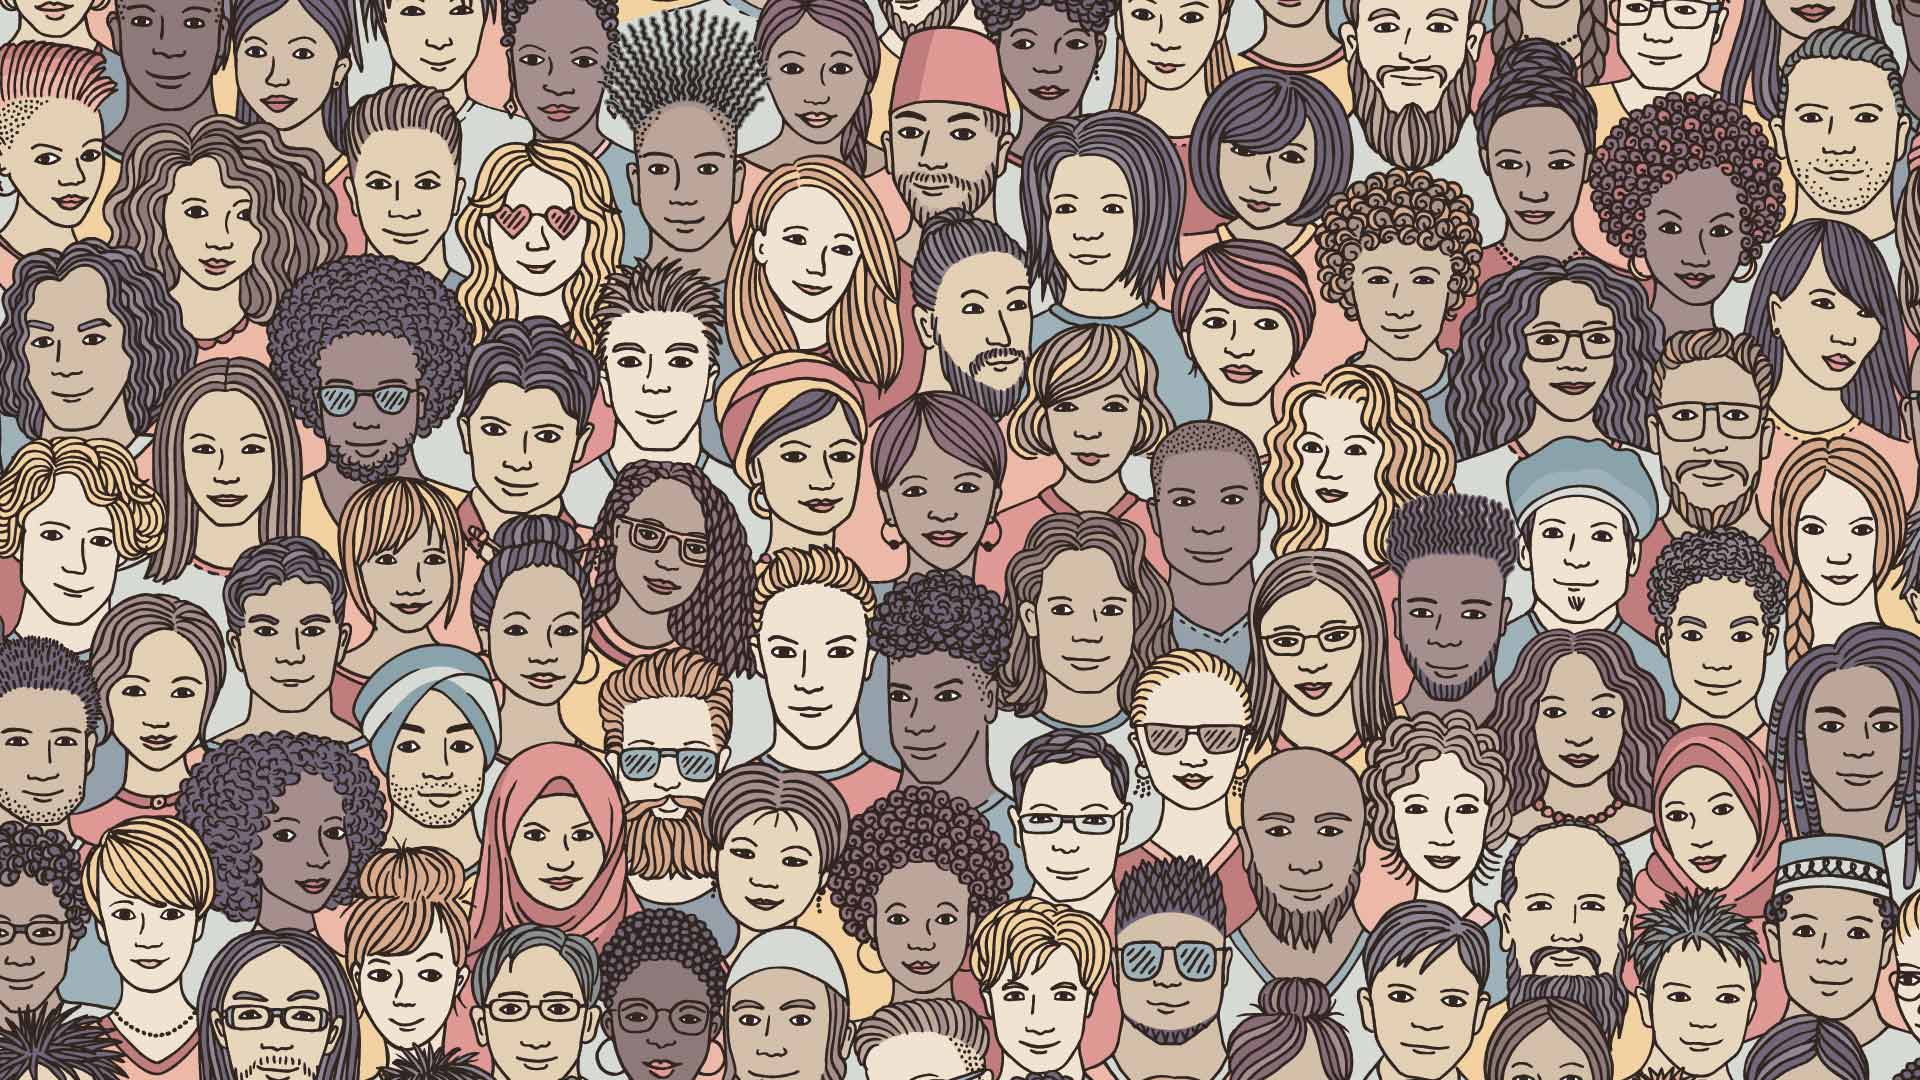 An illustration of people of many ethnic backgrounds